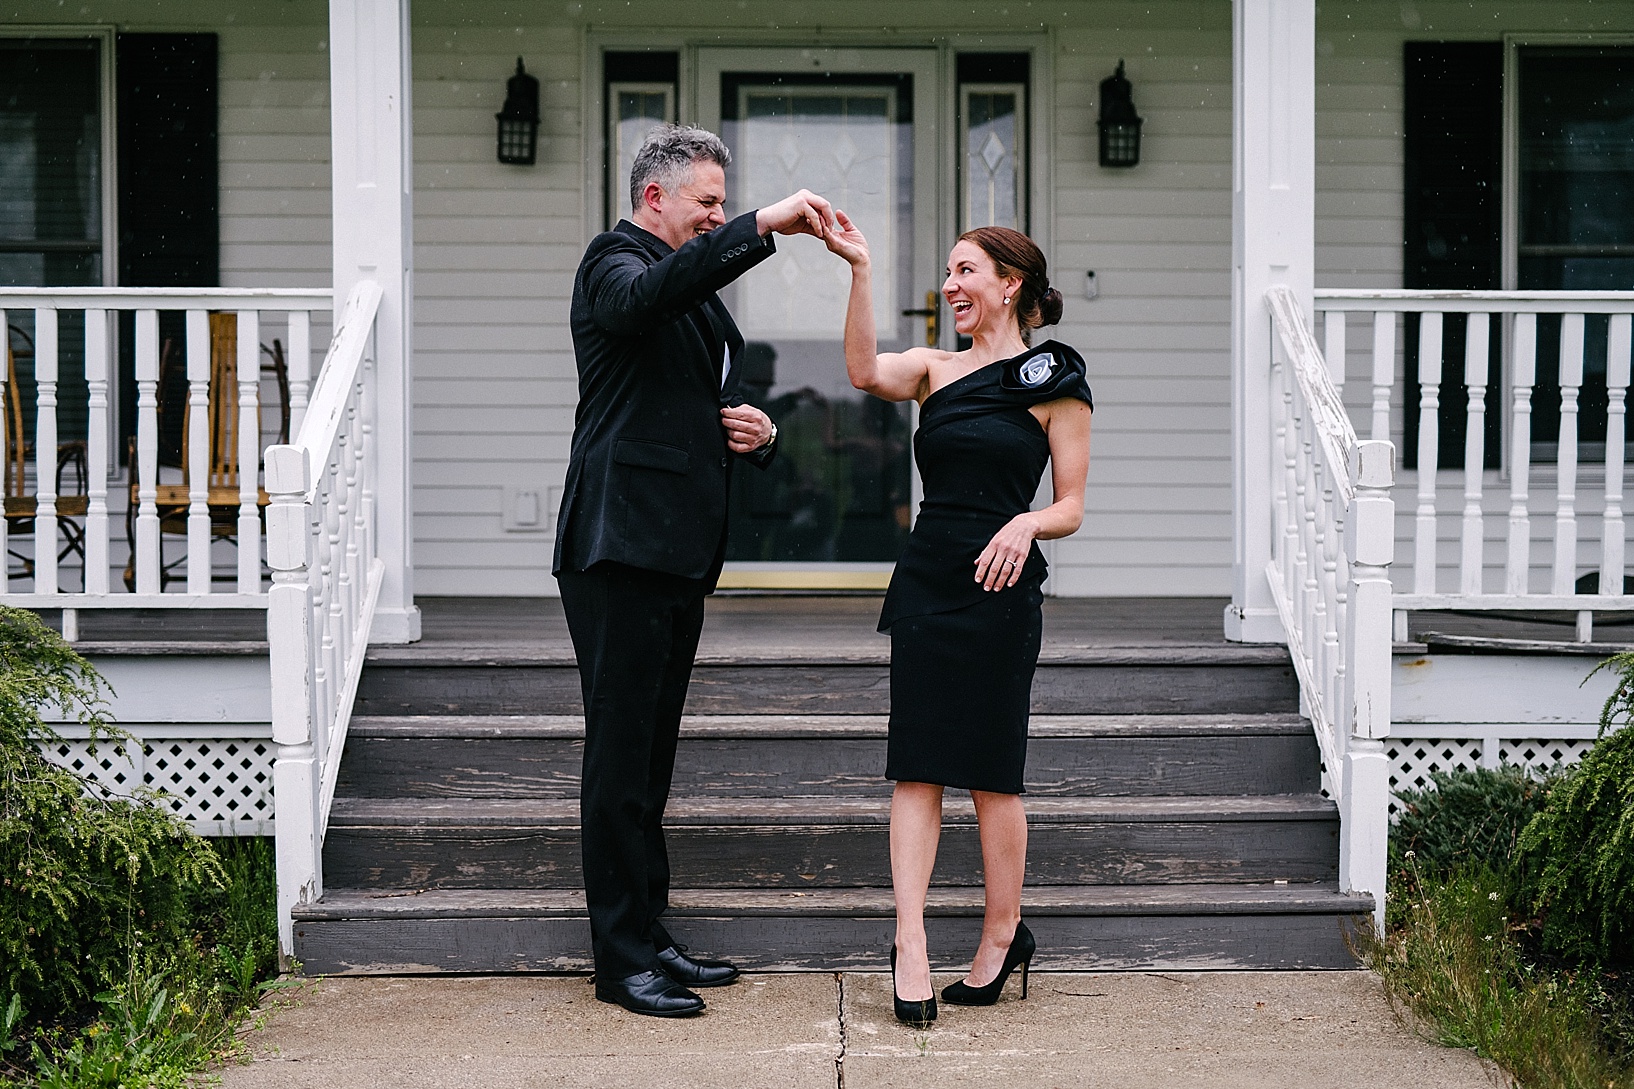 couple in formal attire dancing in front of porch